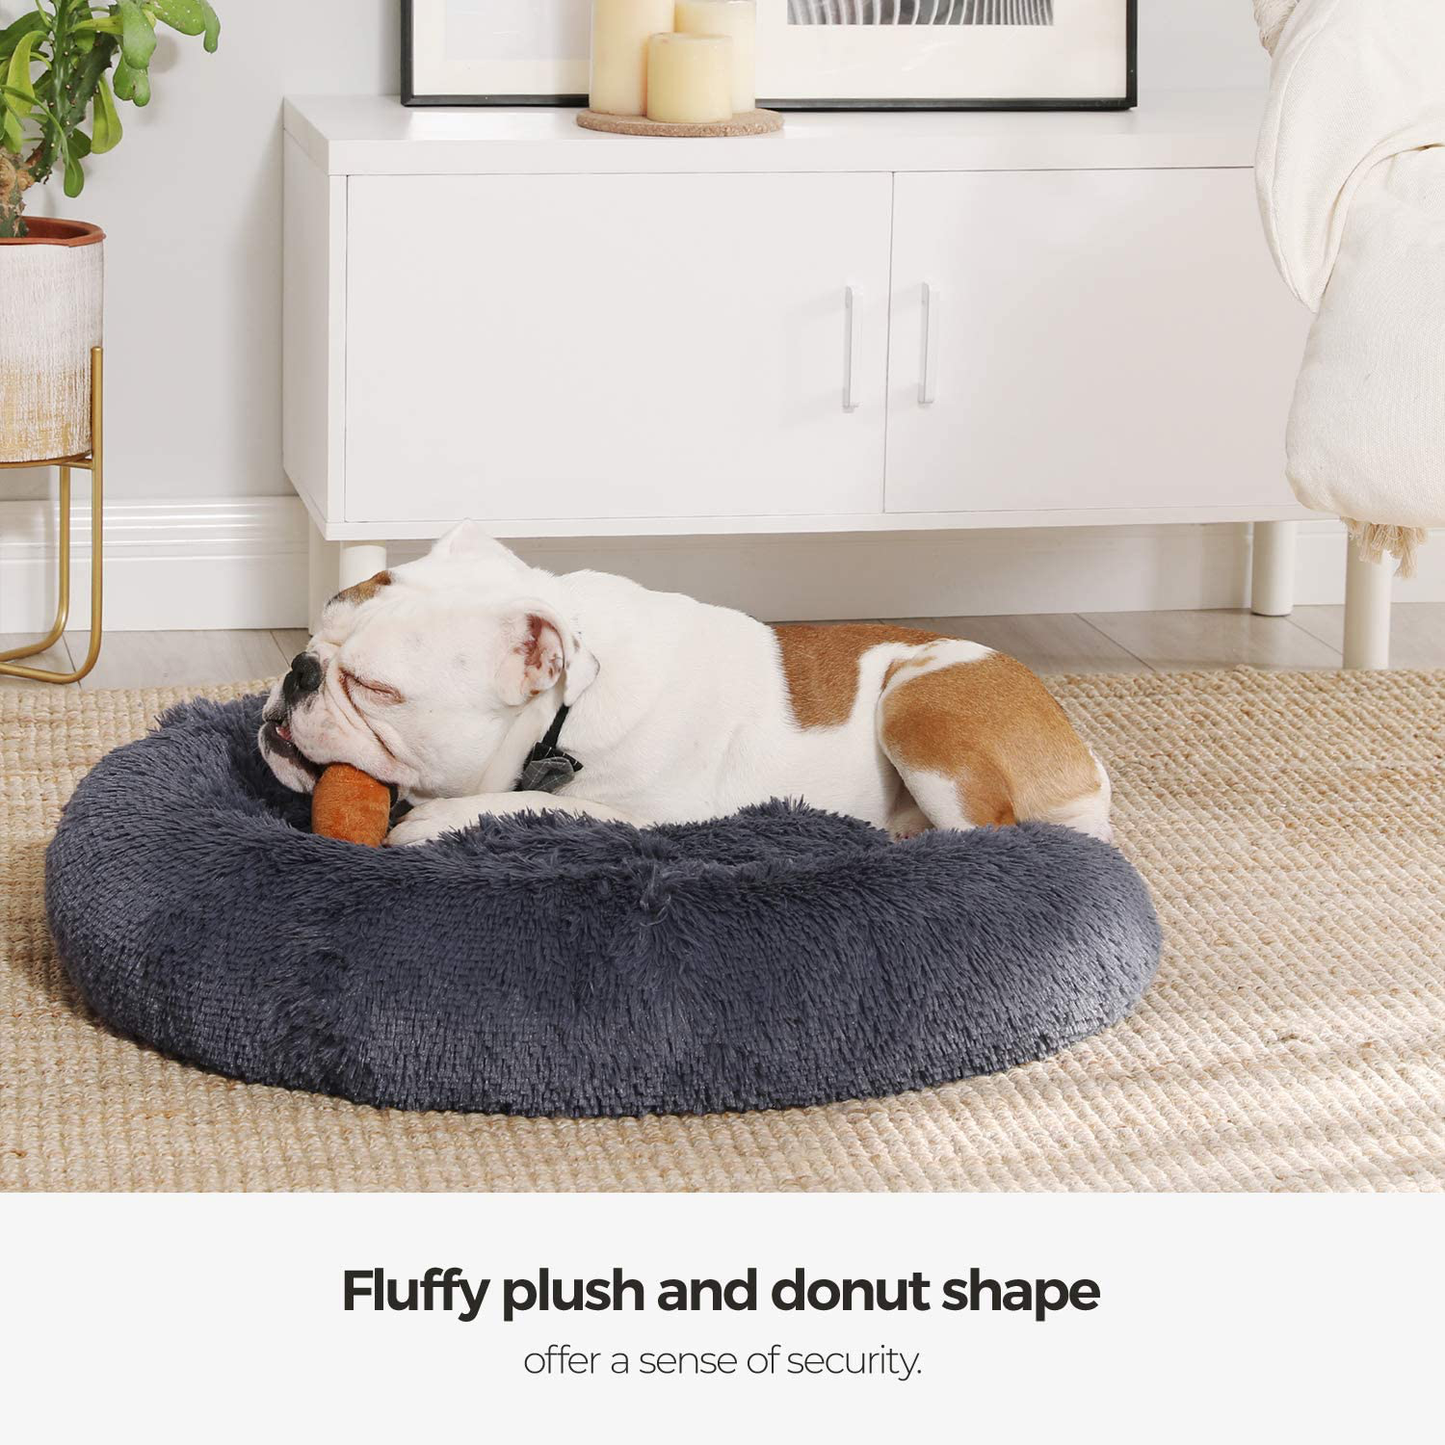 FEANDREA Dog Bed, Cat Bed, Soft Plush Surface, Donut-Shaped Dog Sofa with Removable Inner Cushion, Washable